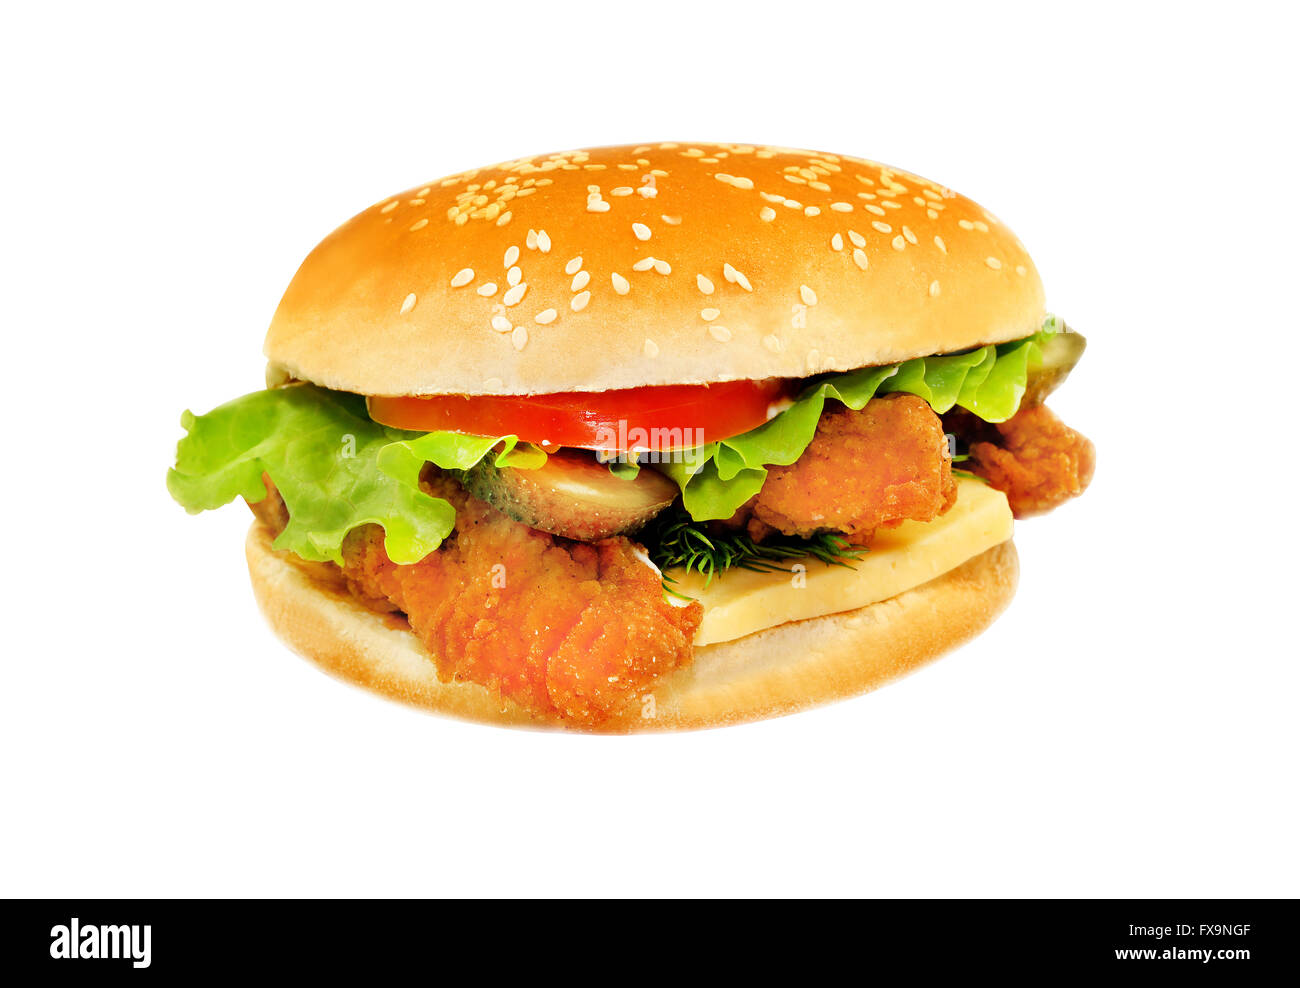 Delicious Burger with meat and vegetables photographed closeup on a white background Stock Photo